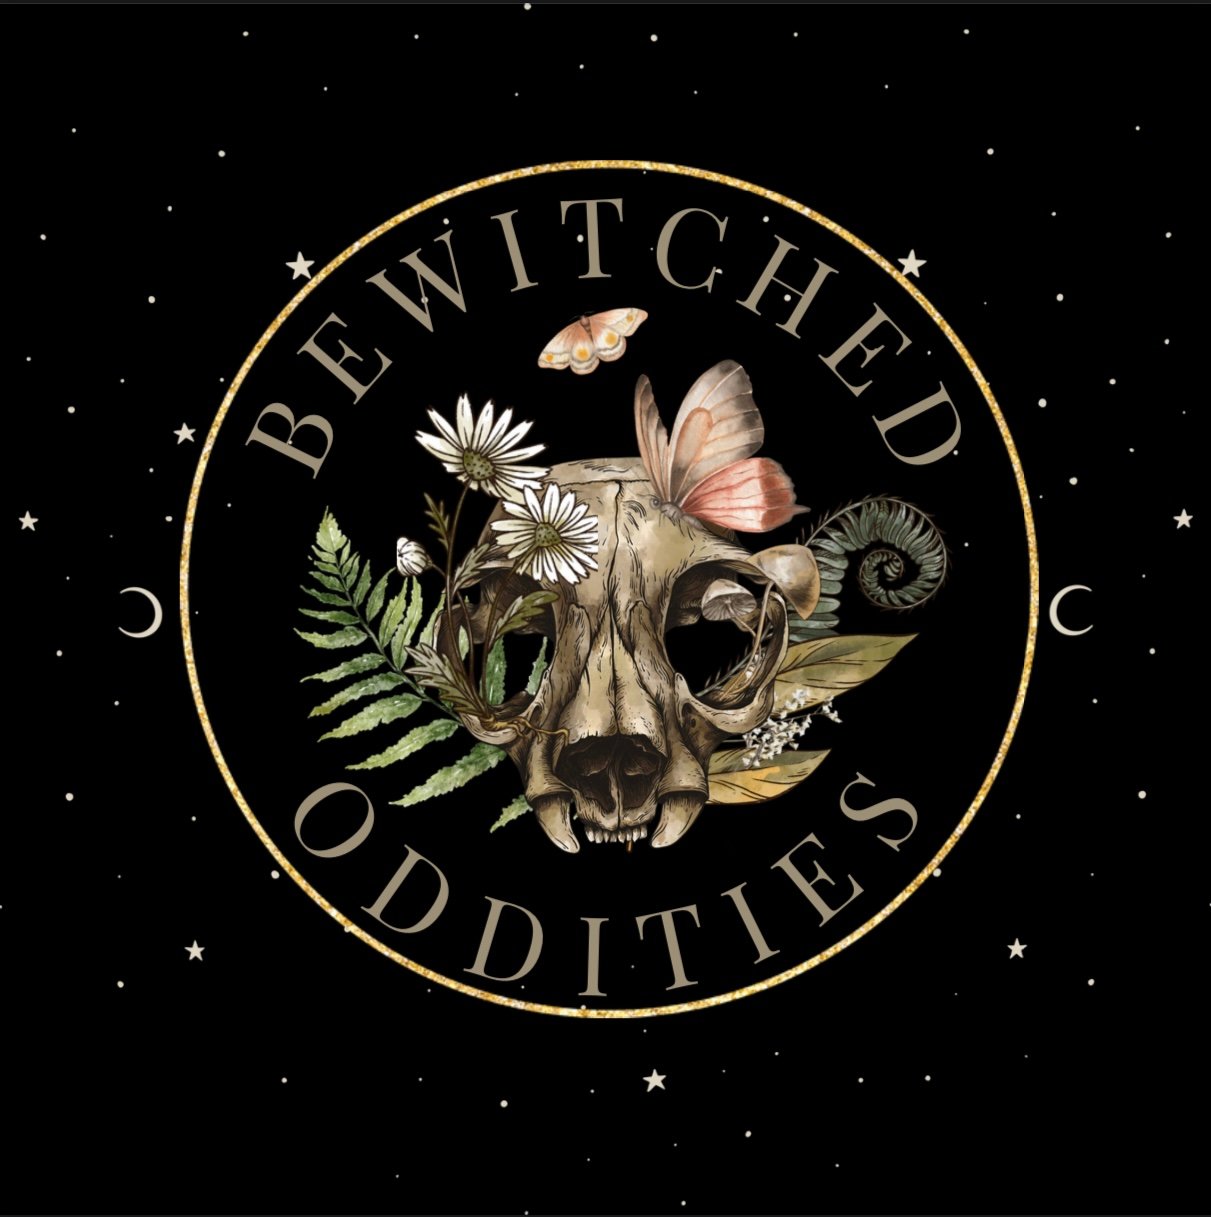 Bewitched Oddities's account image